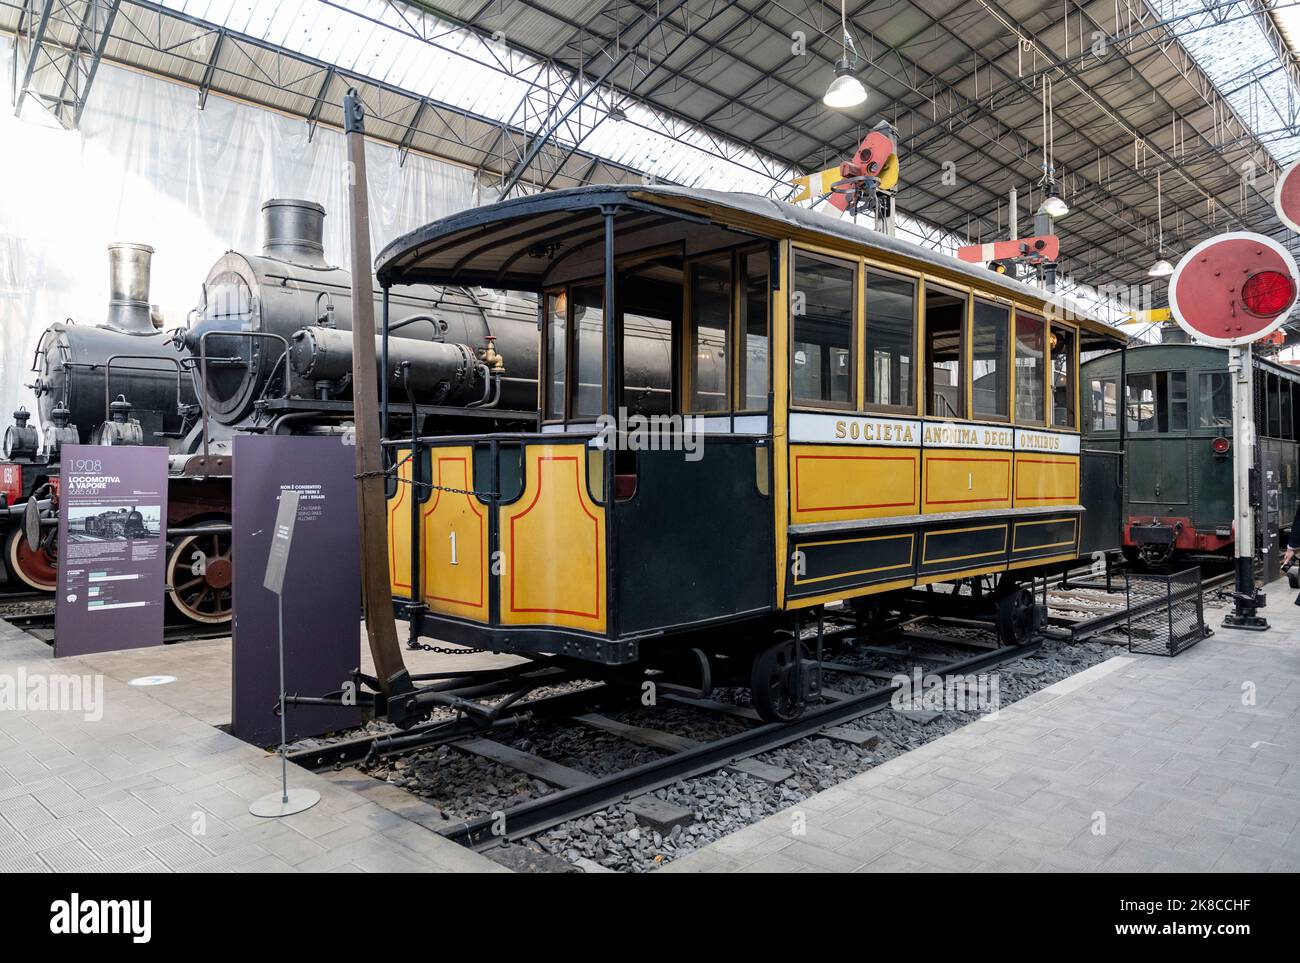 Transport section with omnibus, locomotives and trains in National Museum of Science and Technology, Milan city center, Lombardy region, Italy Stock Photo